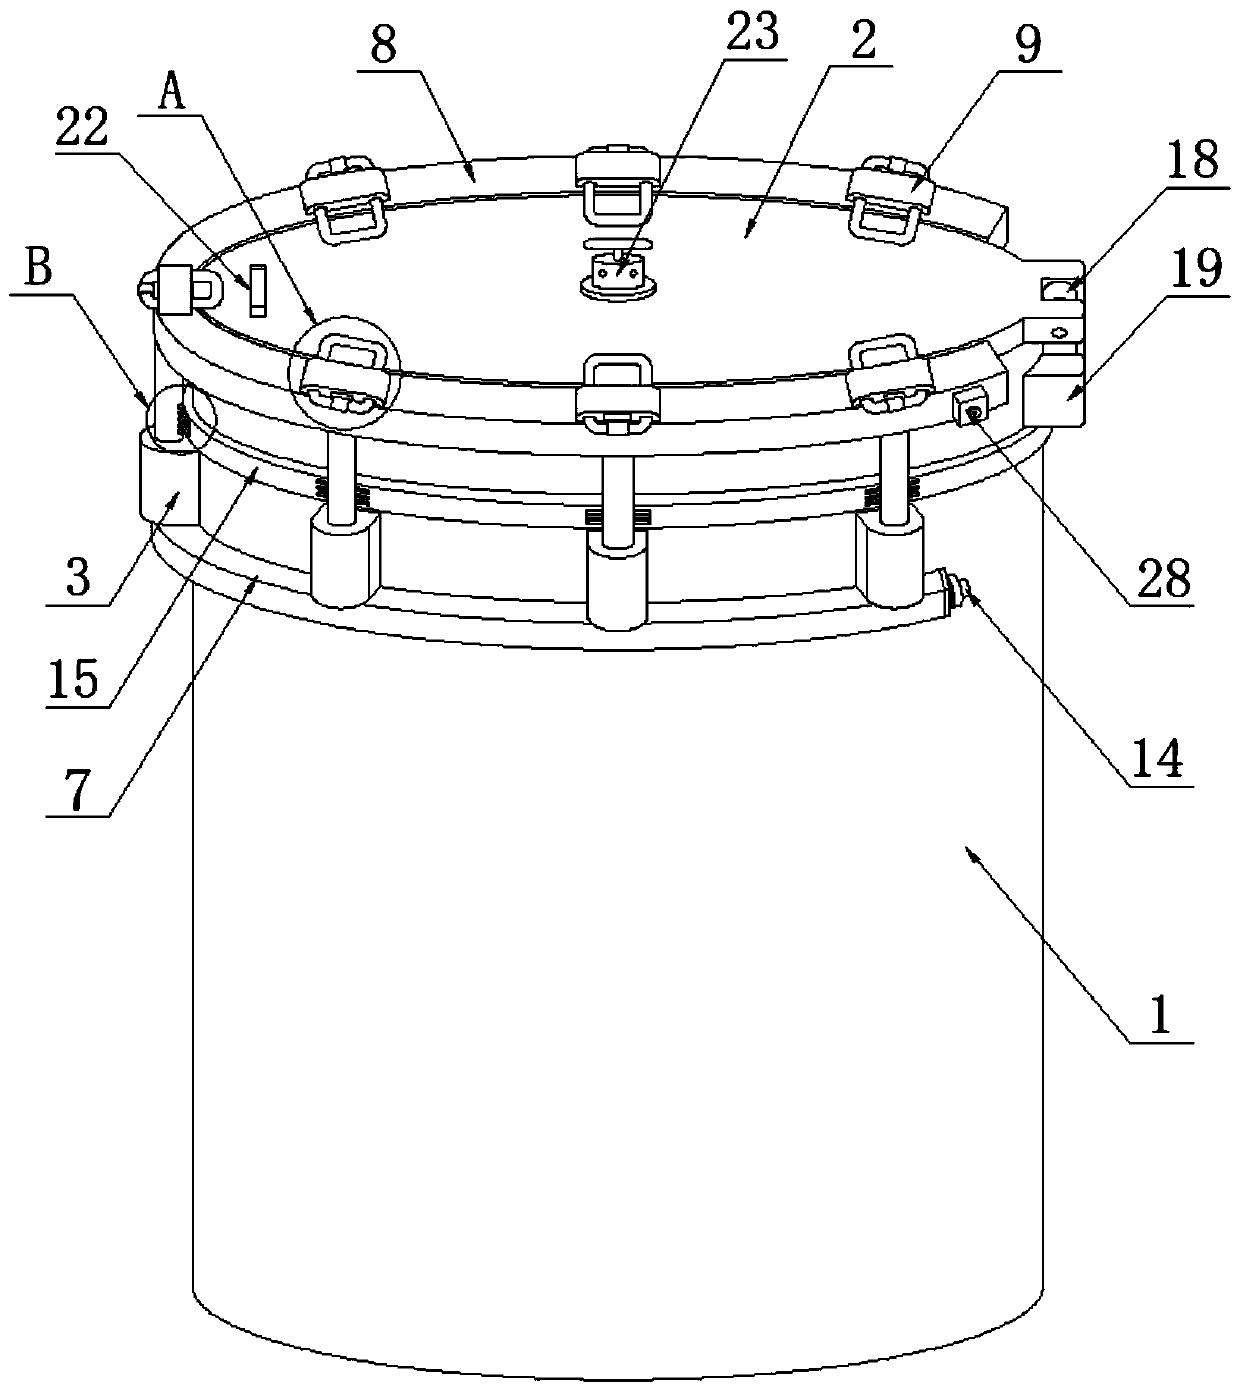 Cylinder cover locking mechanism for vertical pressure container